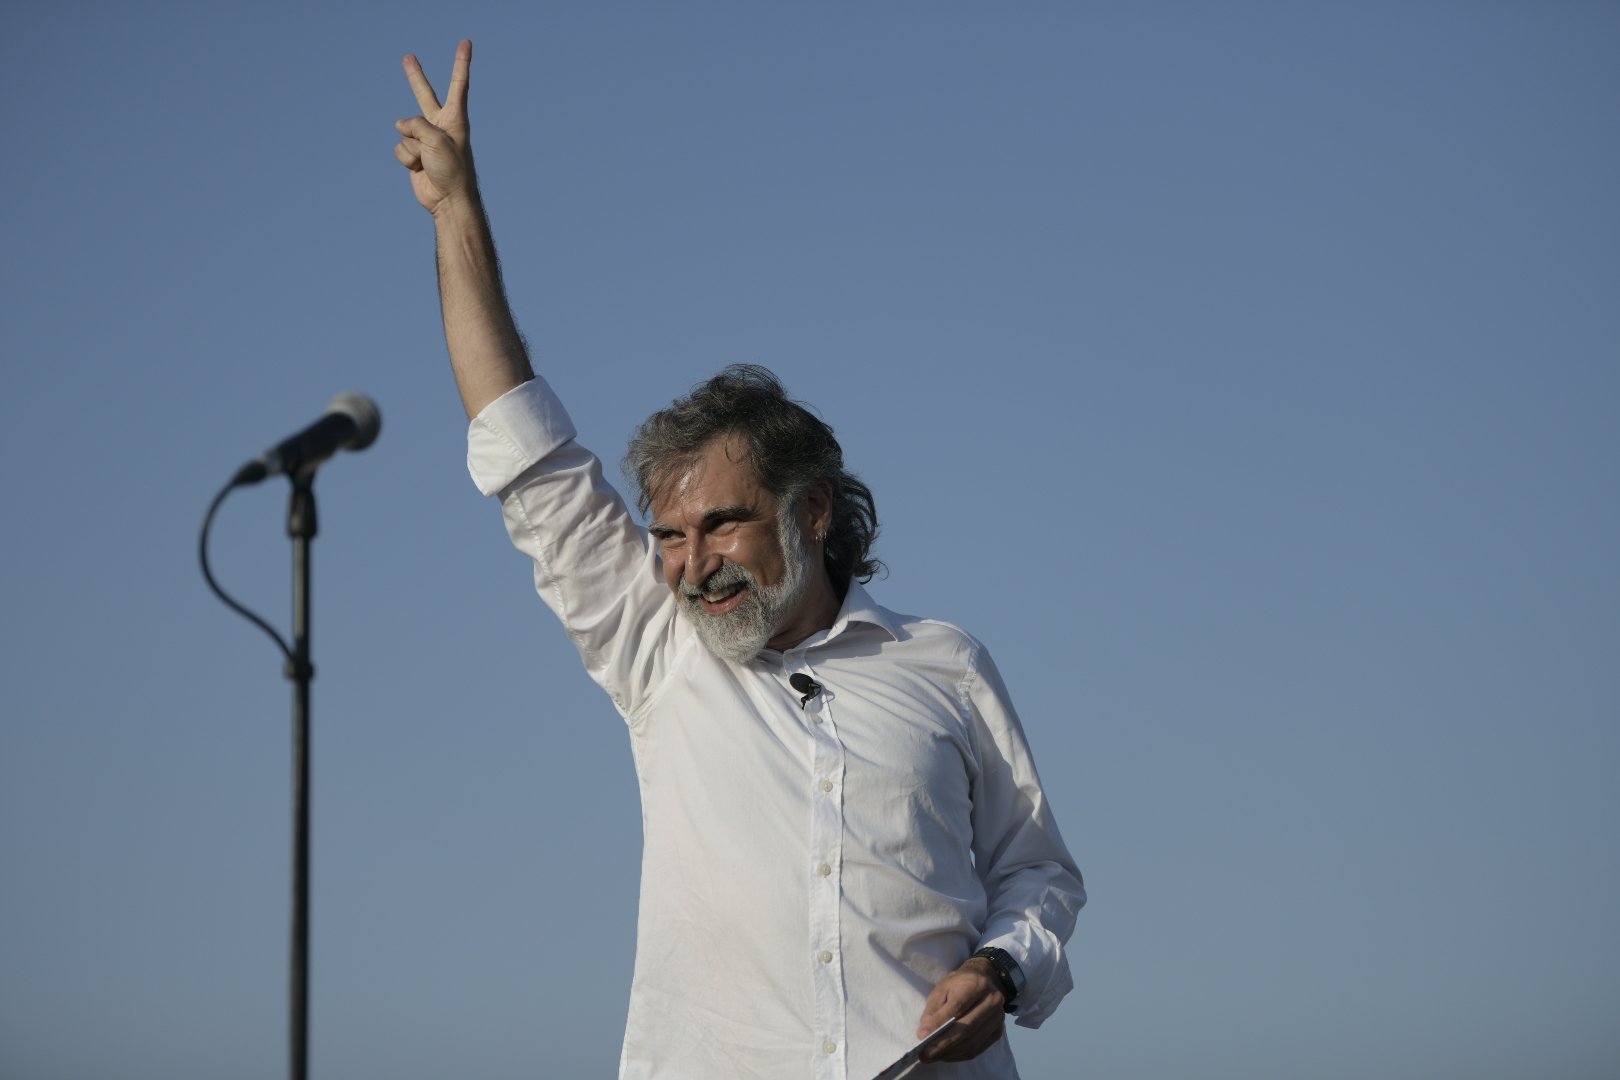 New calls from UN and Council of Europe to release Catalan activist Jordi Cuixart